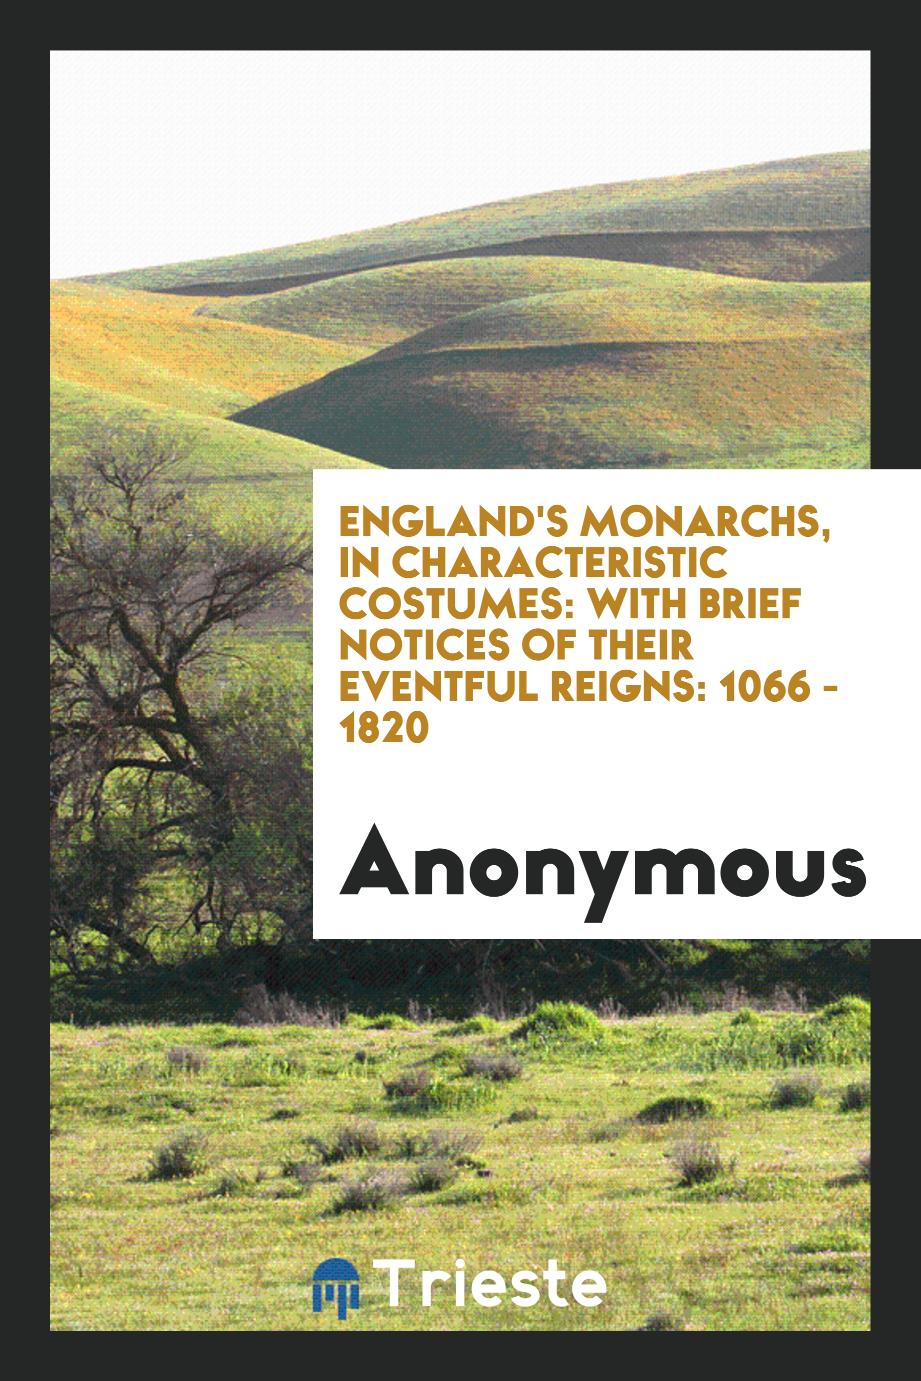 England's Monarchs, in Characteristic Costumes: With Brief Notices of Their Eventful reigns: 1066 - 1820